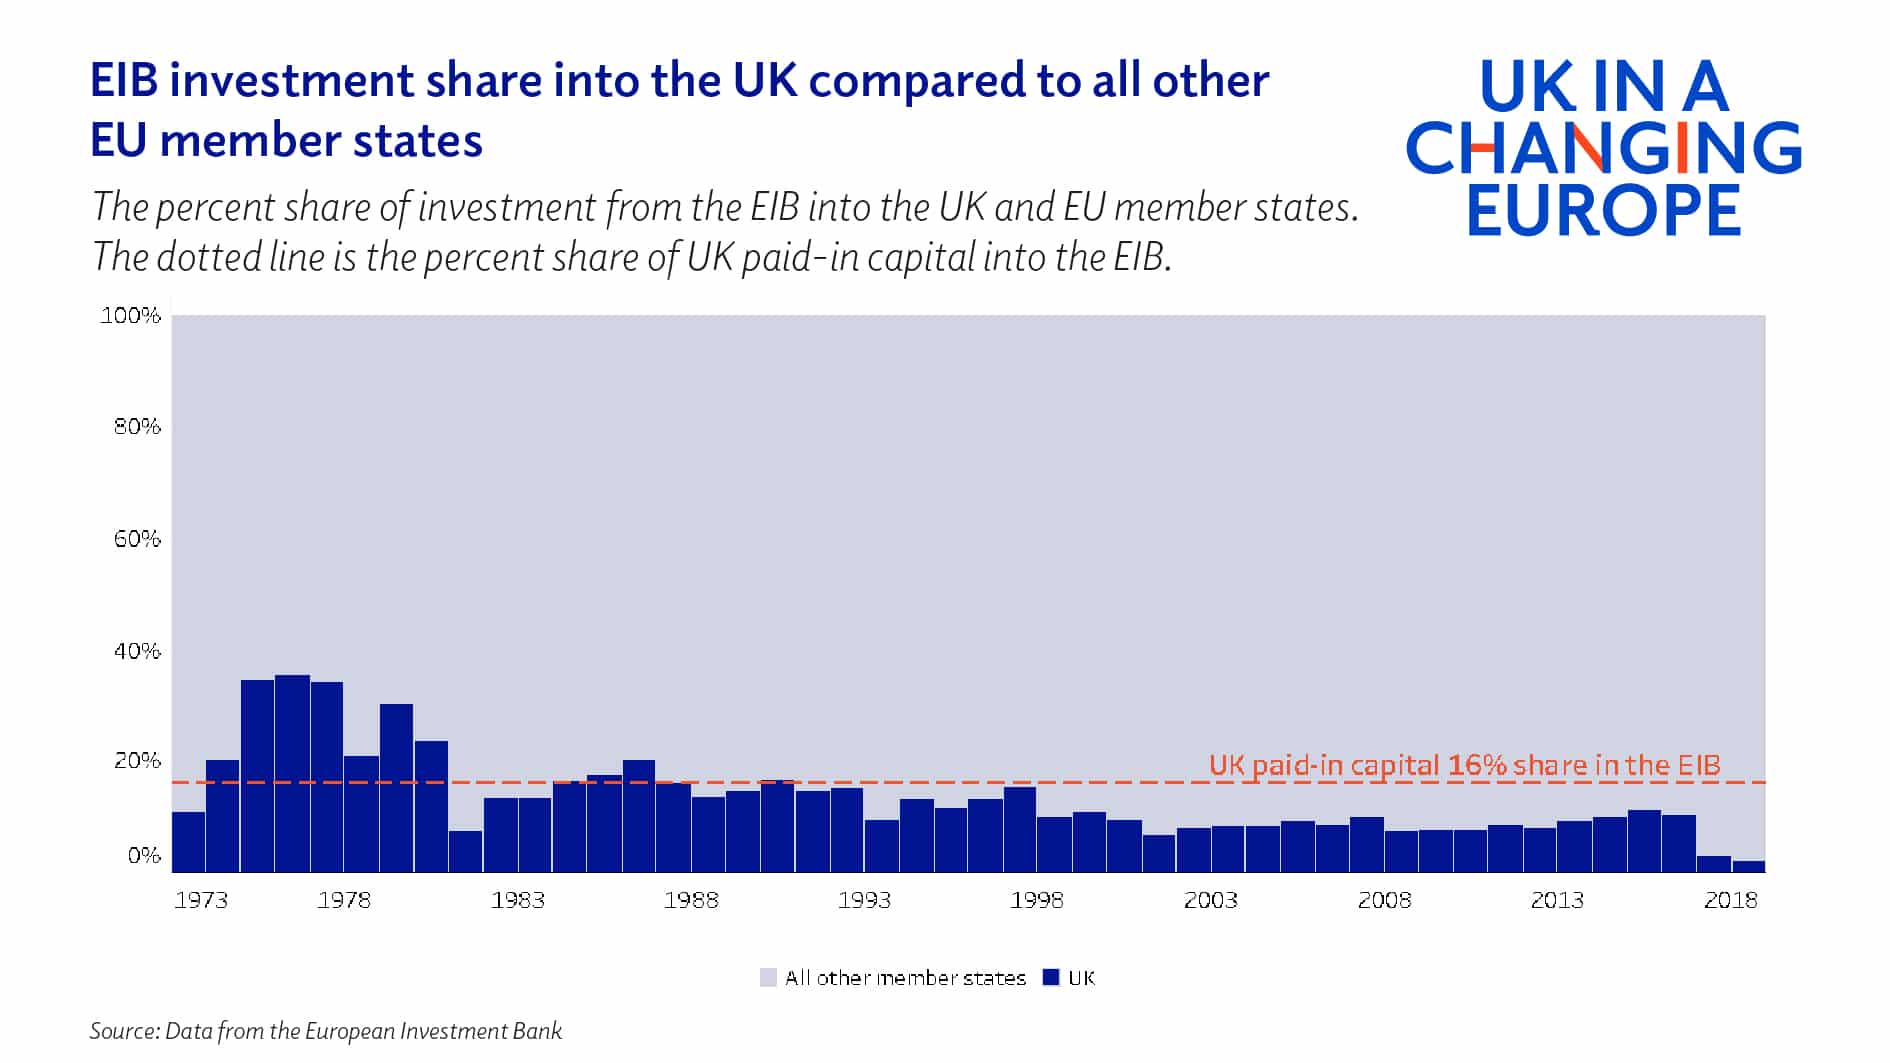 Chart showing the EIB investment share into the UK compared to all other member states